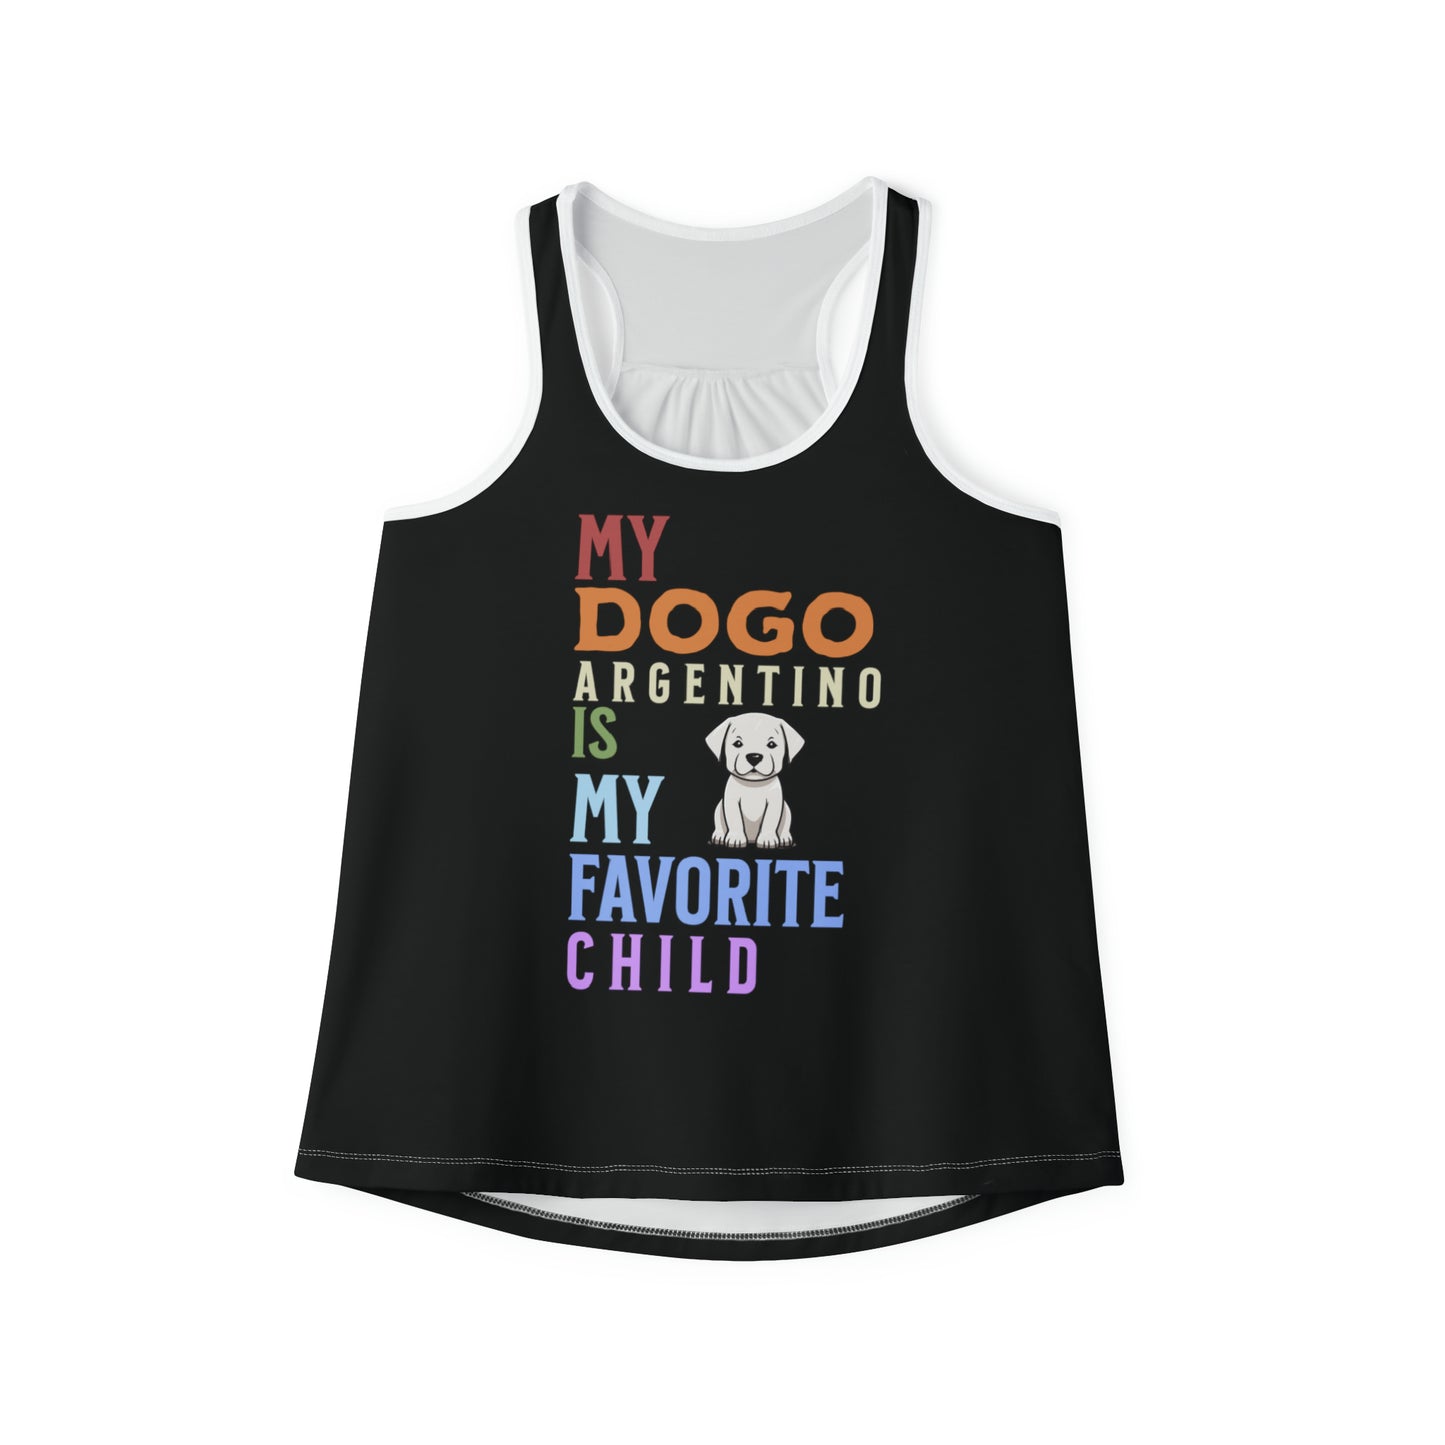 My Dogo Argentino Is My Favorite Child Women's Tank Top (AOP)